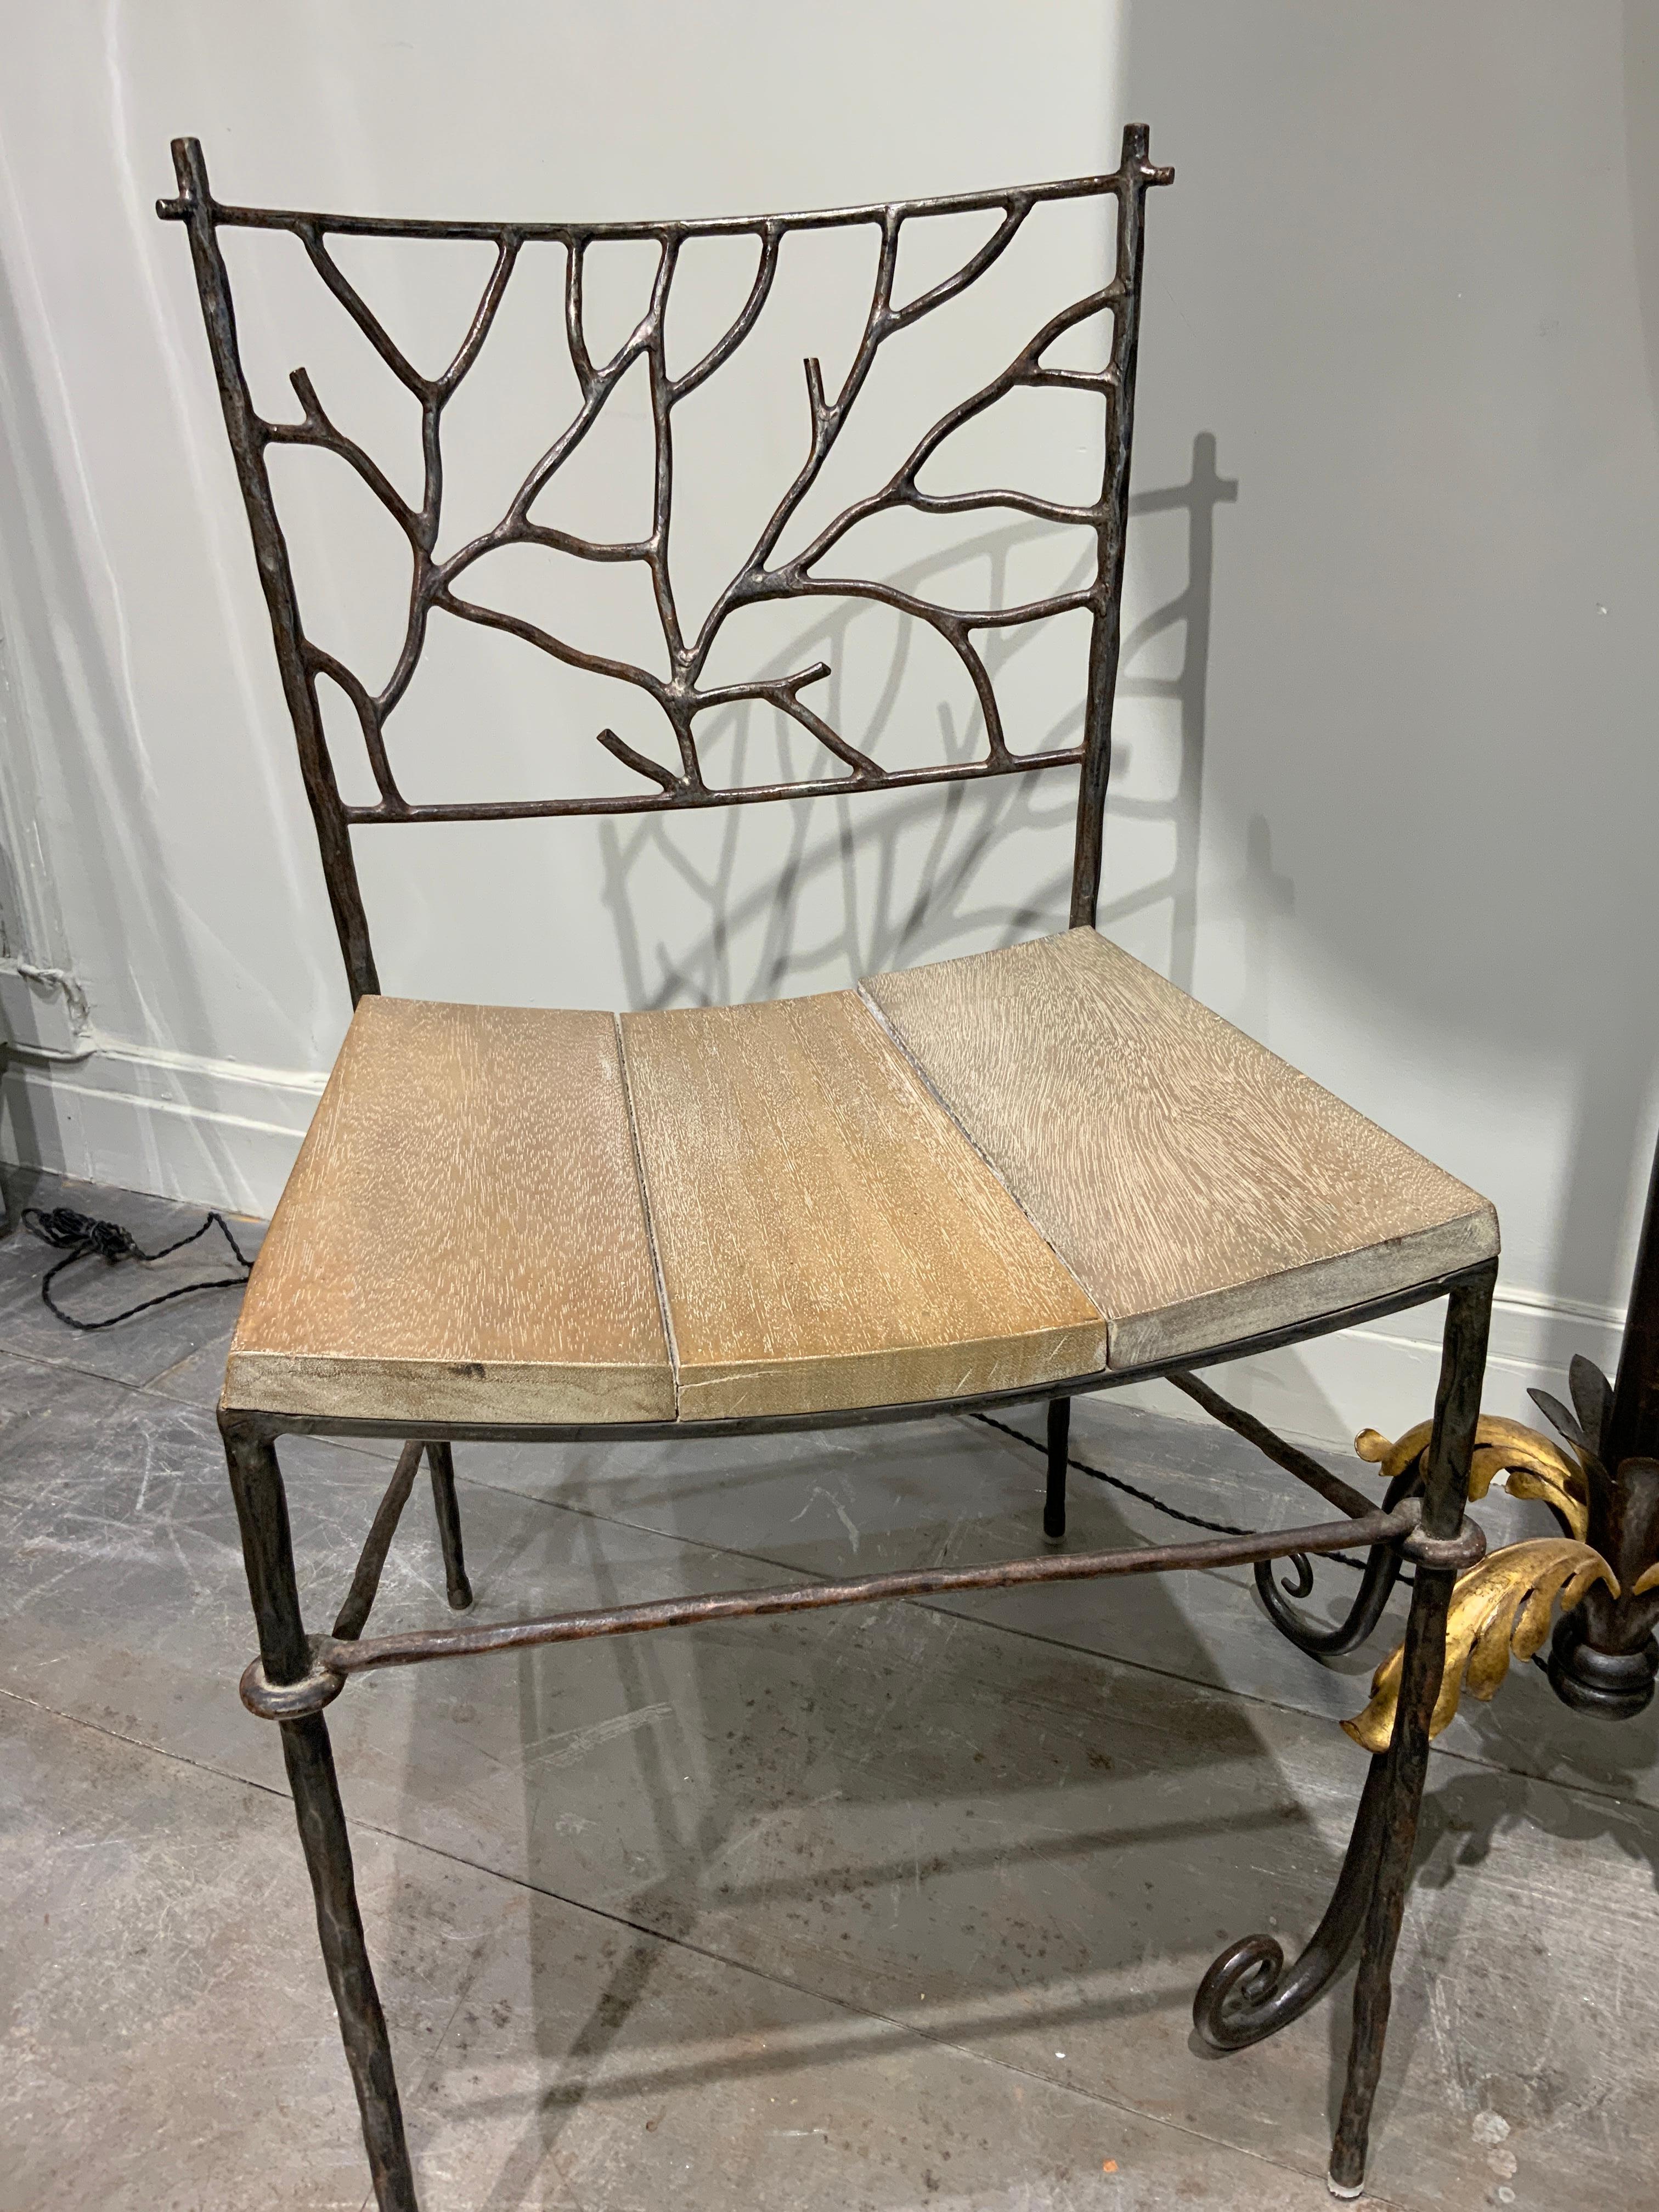 Exquisite and unique pair of hand wrought iron naturalistic chairs France circa 1960
Oak seat 
